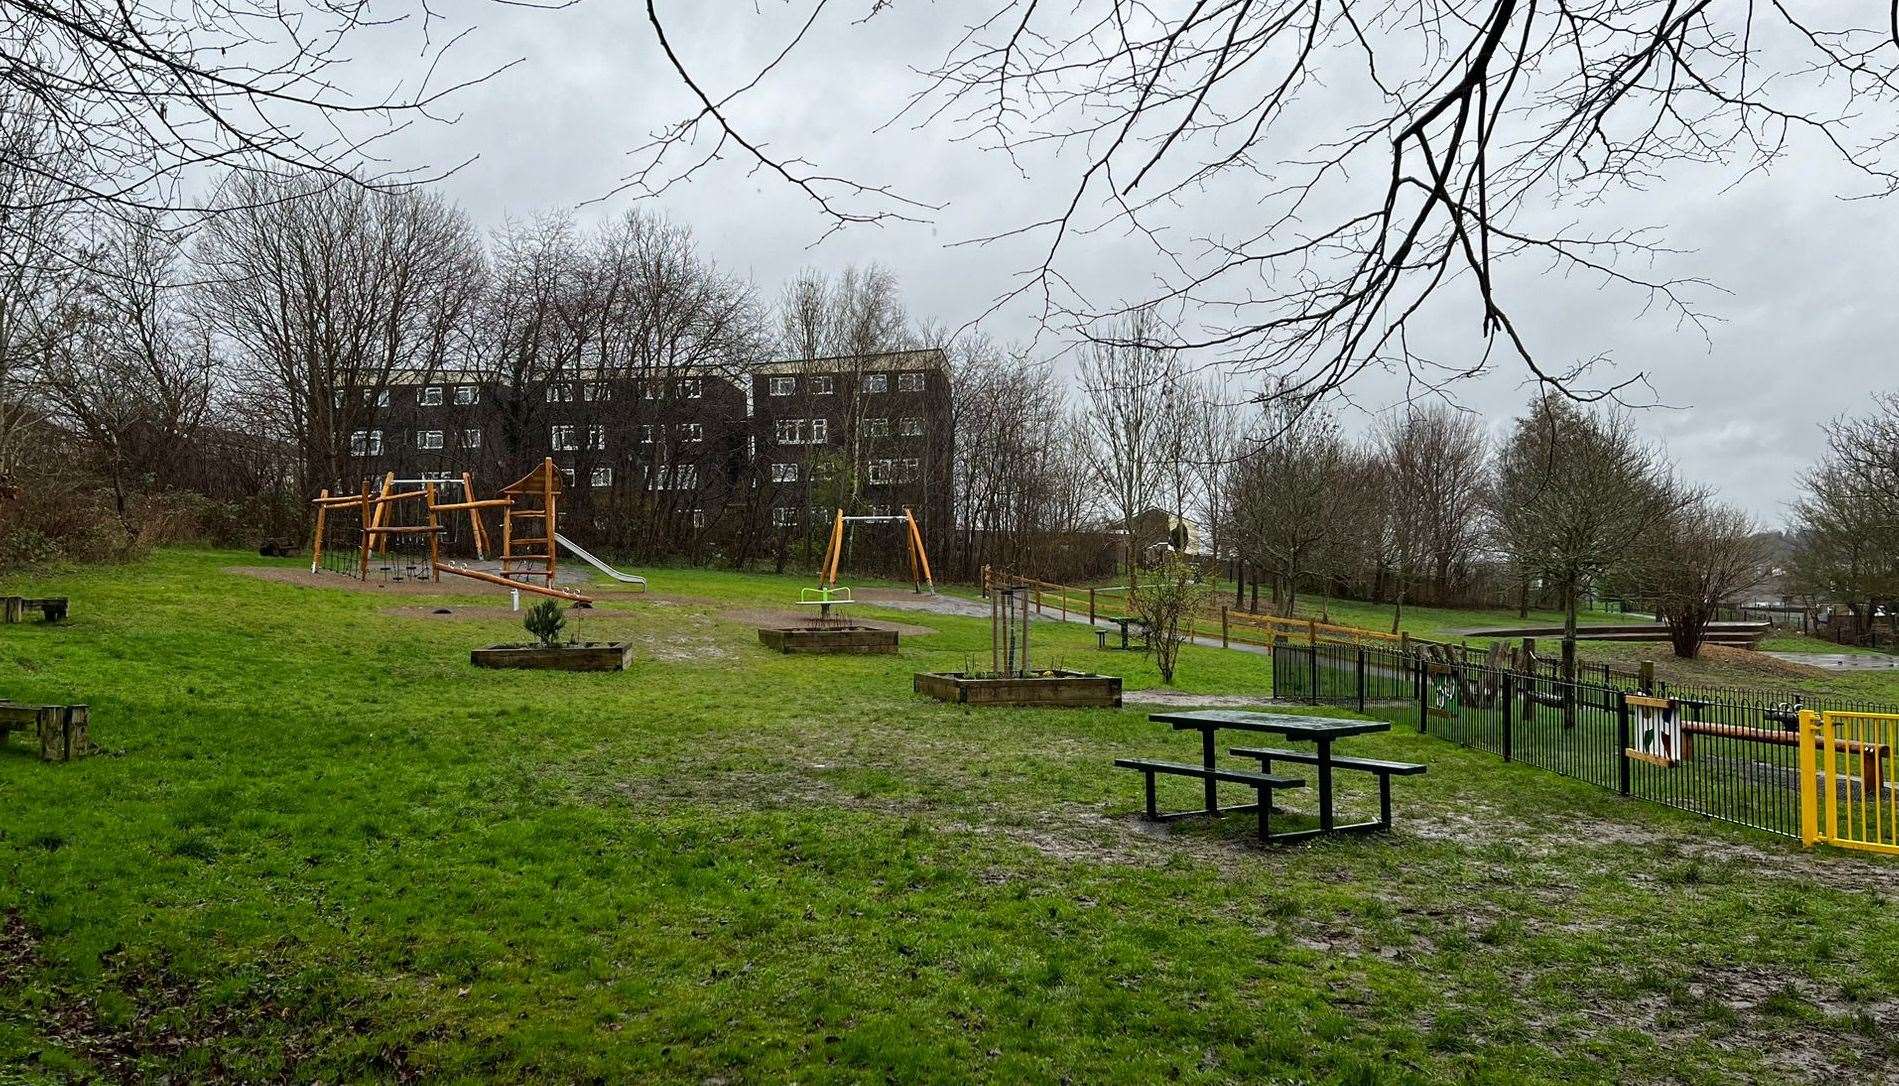 The new equipment at Luton Millennium Green in Chatham. Picture: Medway Council